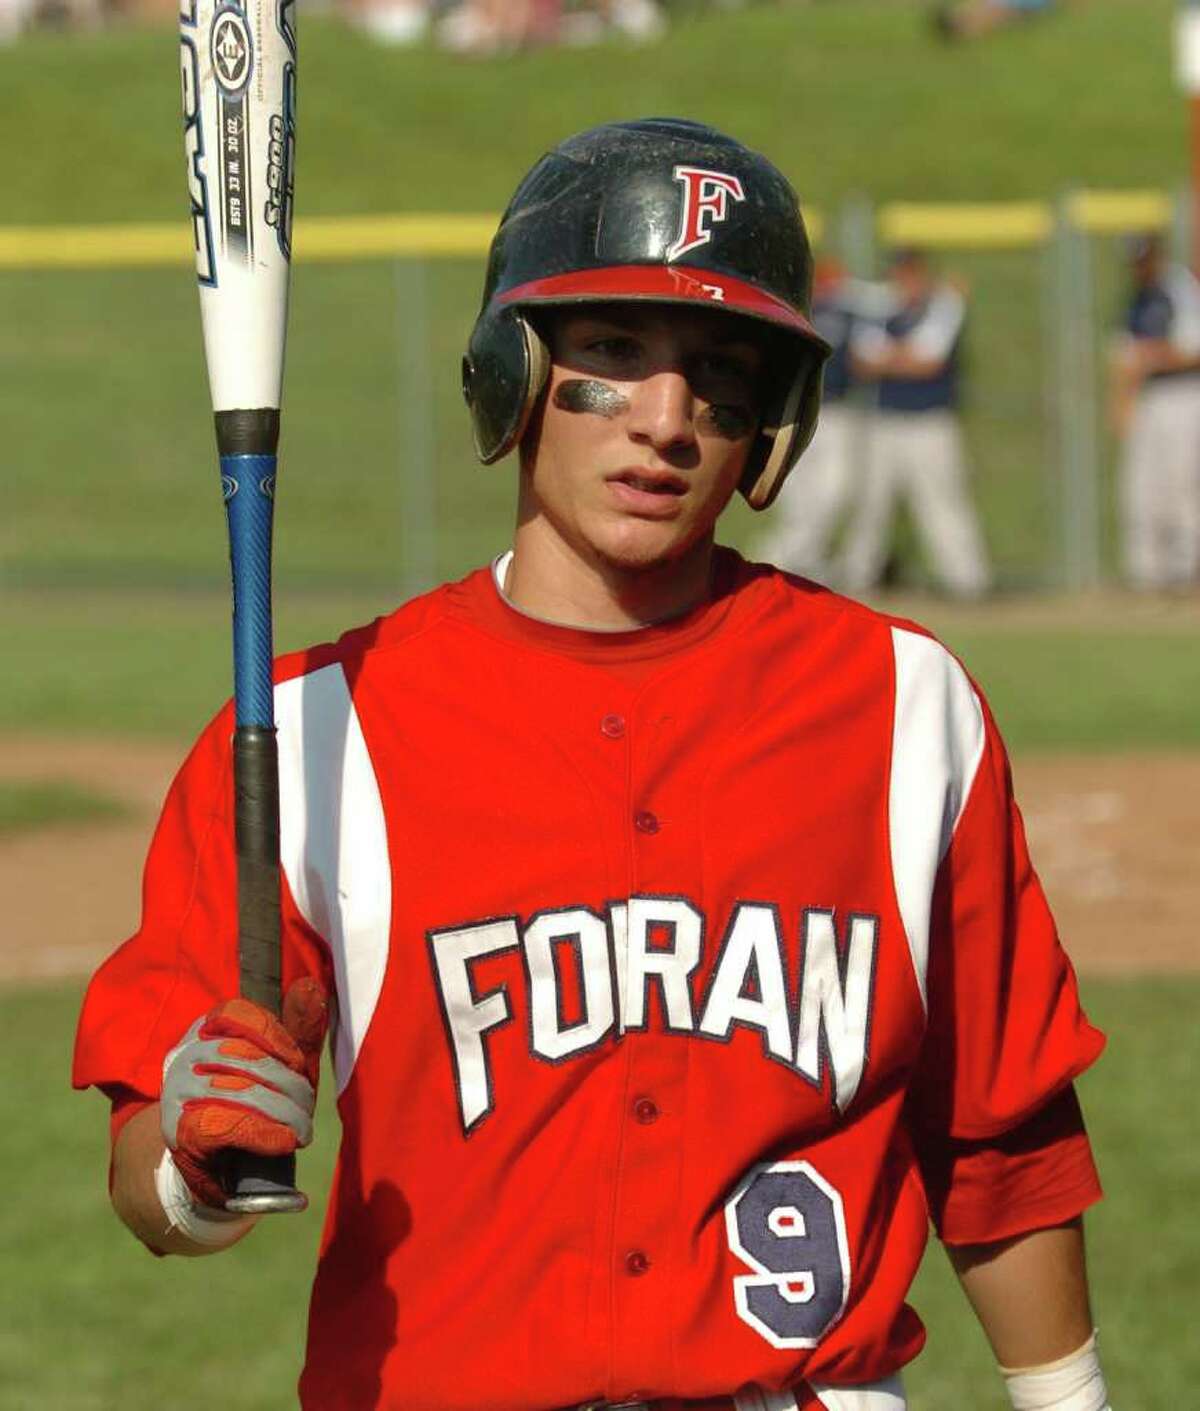 Highlights from CIAC boys Class L state baseball between Foran and Wethersfield in Milford, Conn. on Tuesday May 31, 2011. Foran's #9 Michael Deptulsk.